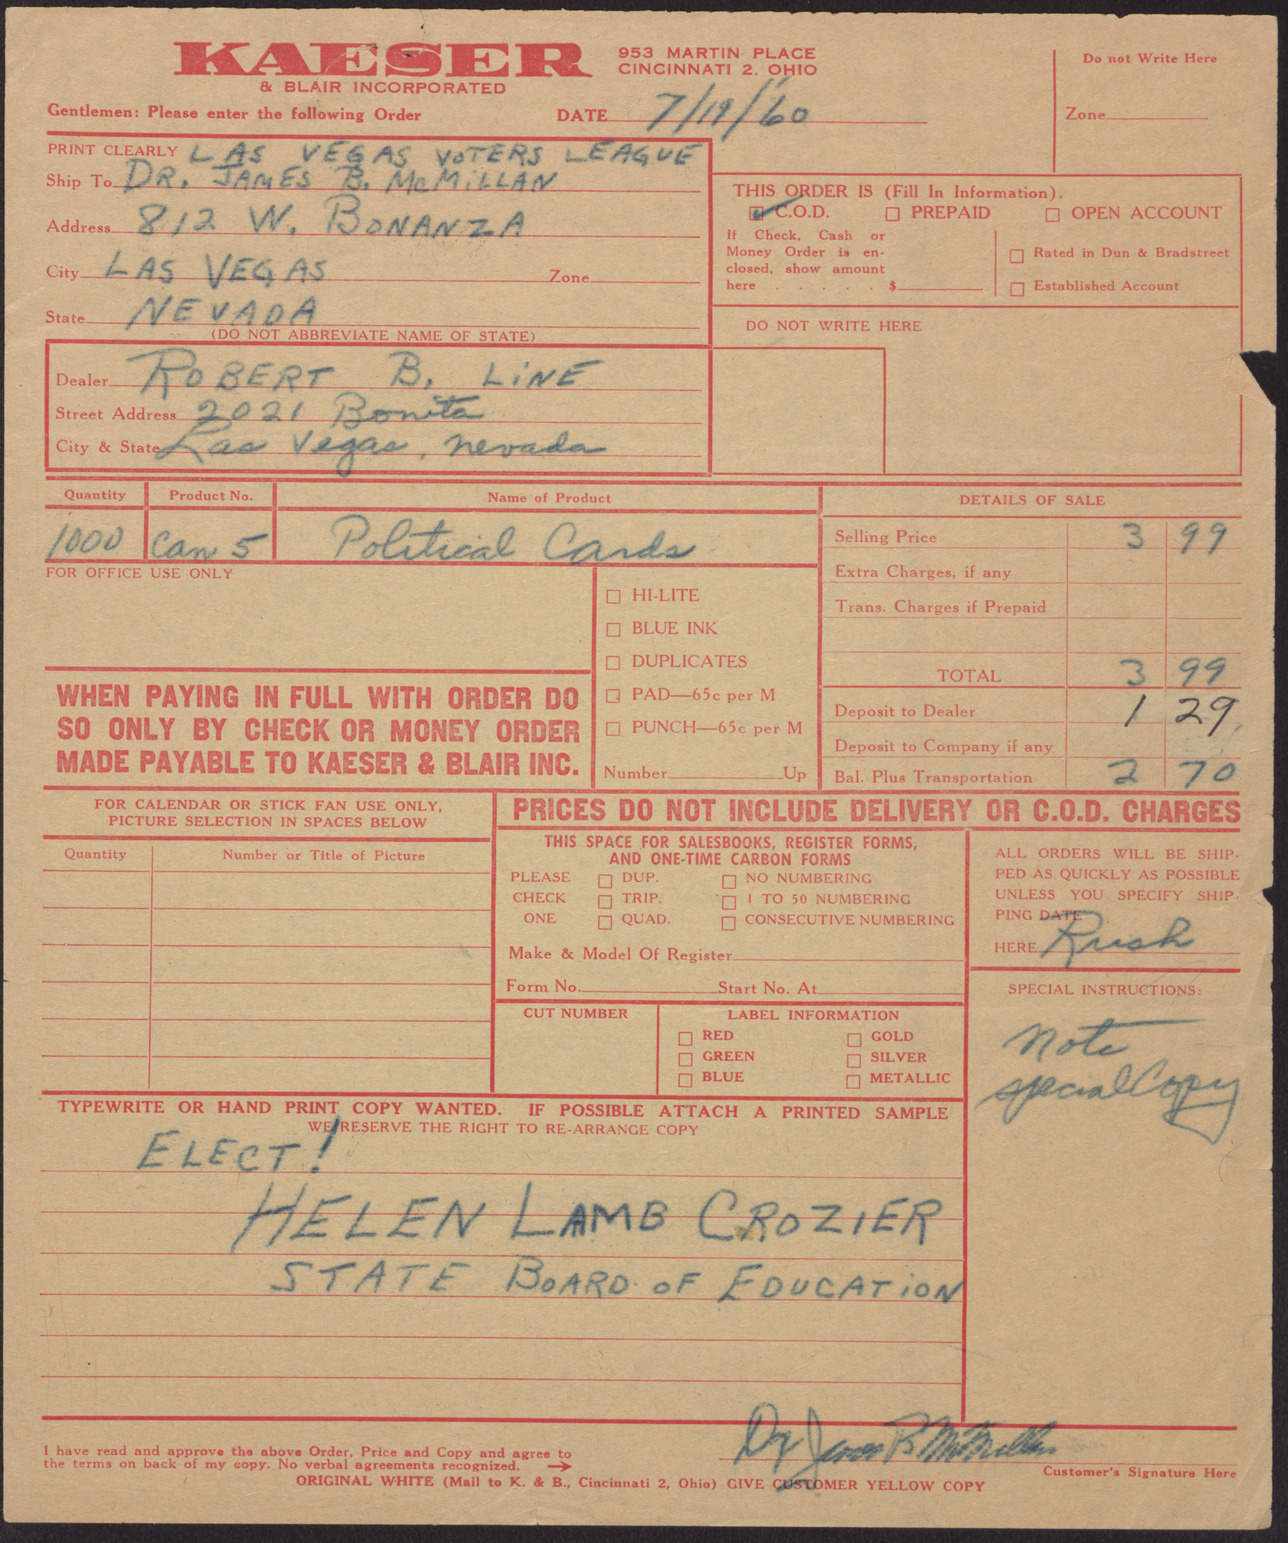 Order form for some type of promotional print for the State Board of Education election of Helen Lamb Crozier (with a special note attached), July 19, 1960